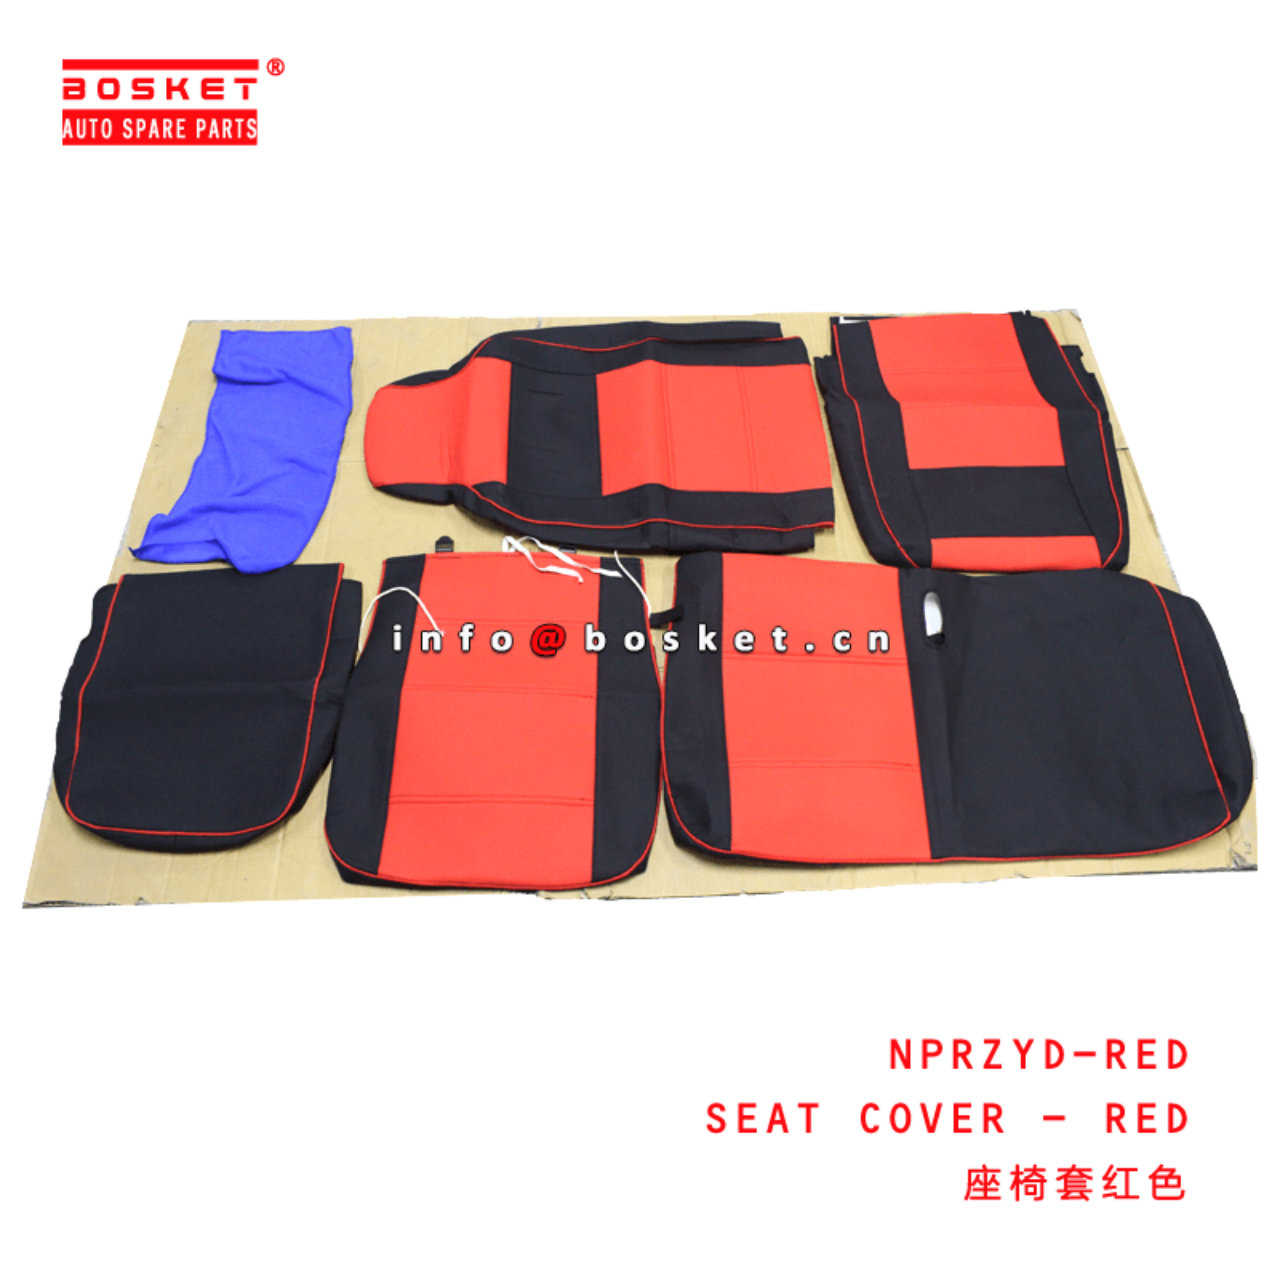  NPRZYD-RED Seat Cover - Red Suitable for ISUZU NPR